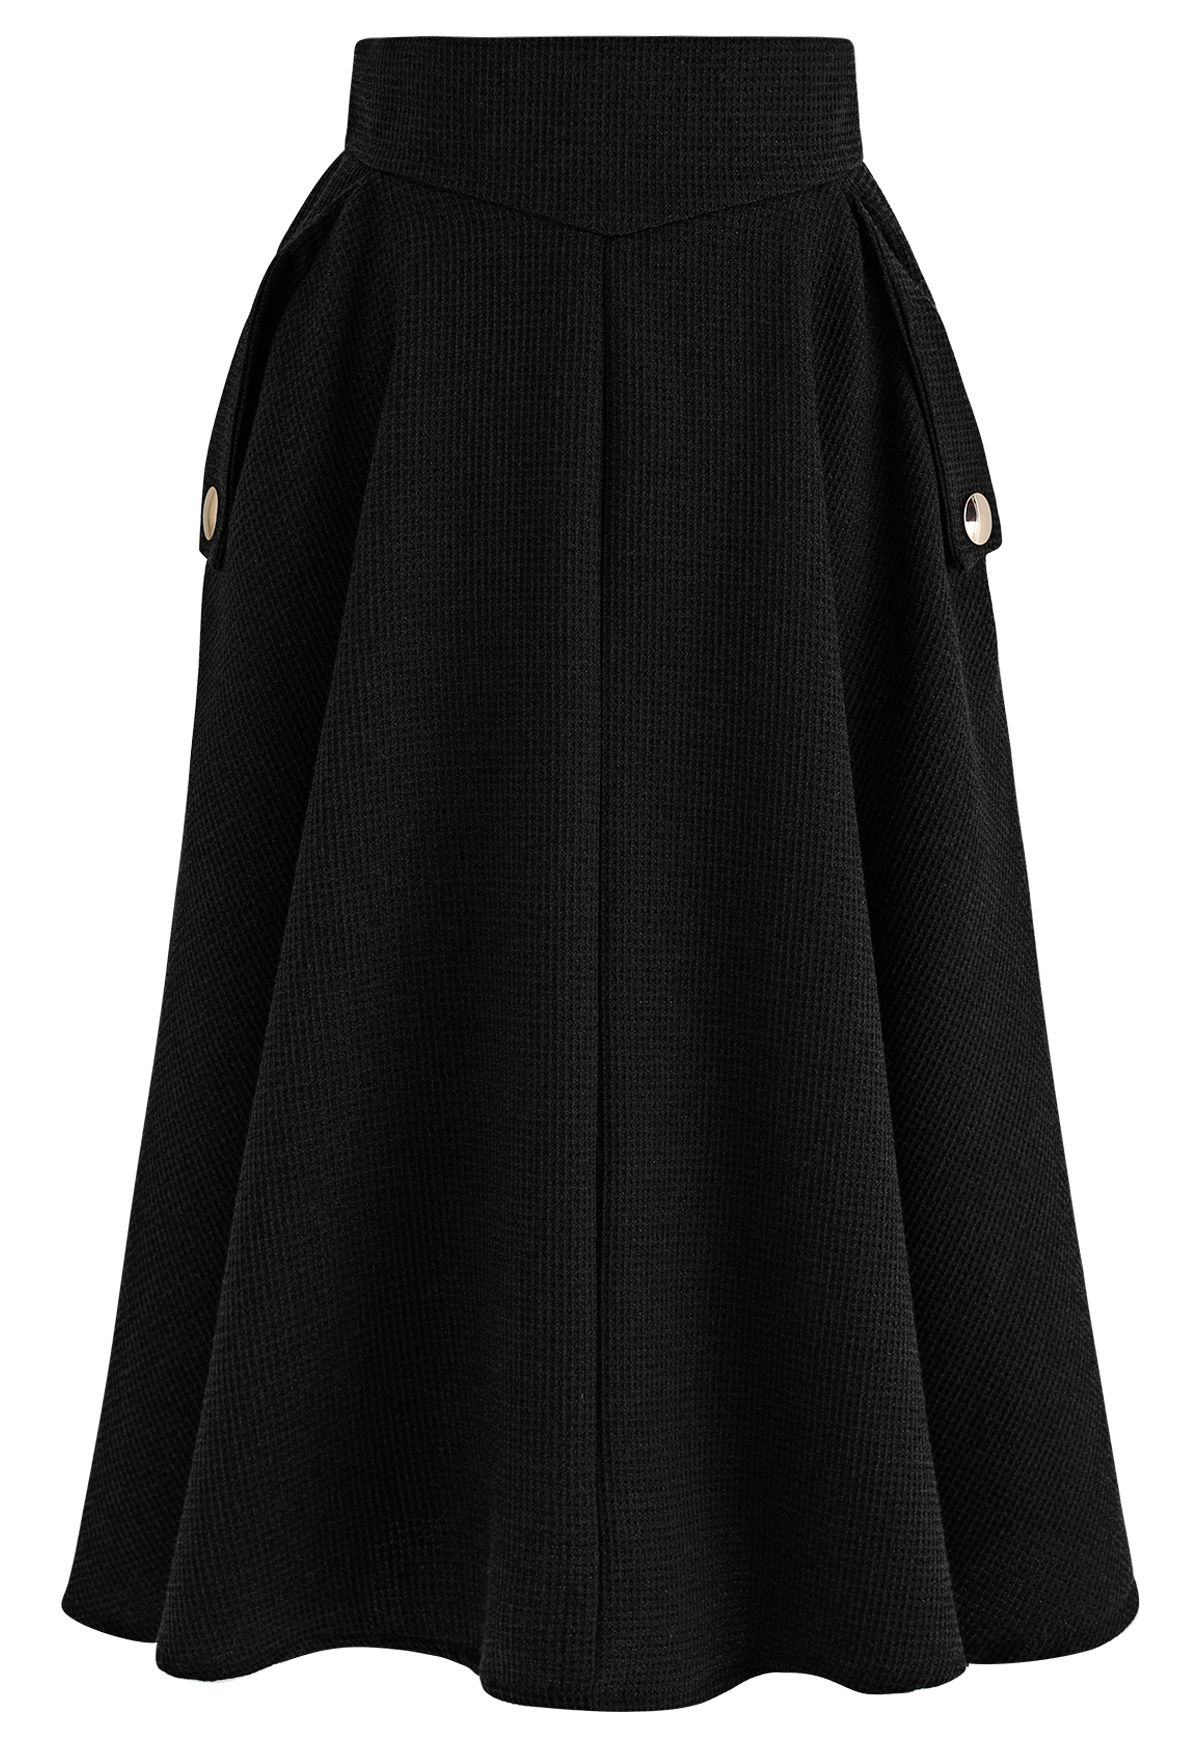 Waffle Texture A-Line Midi Skirt in Black - Retro, Indie and Unique Fashion